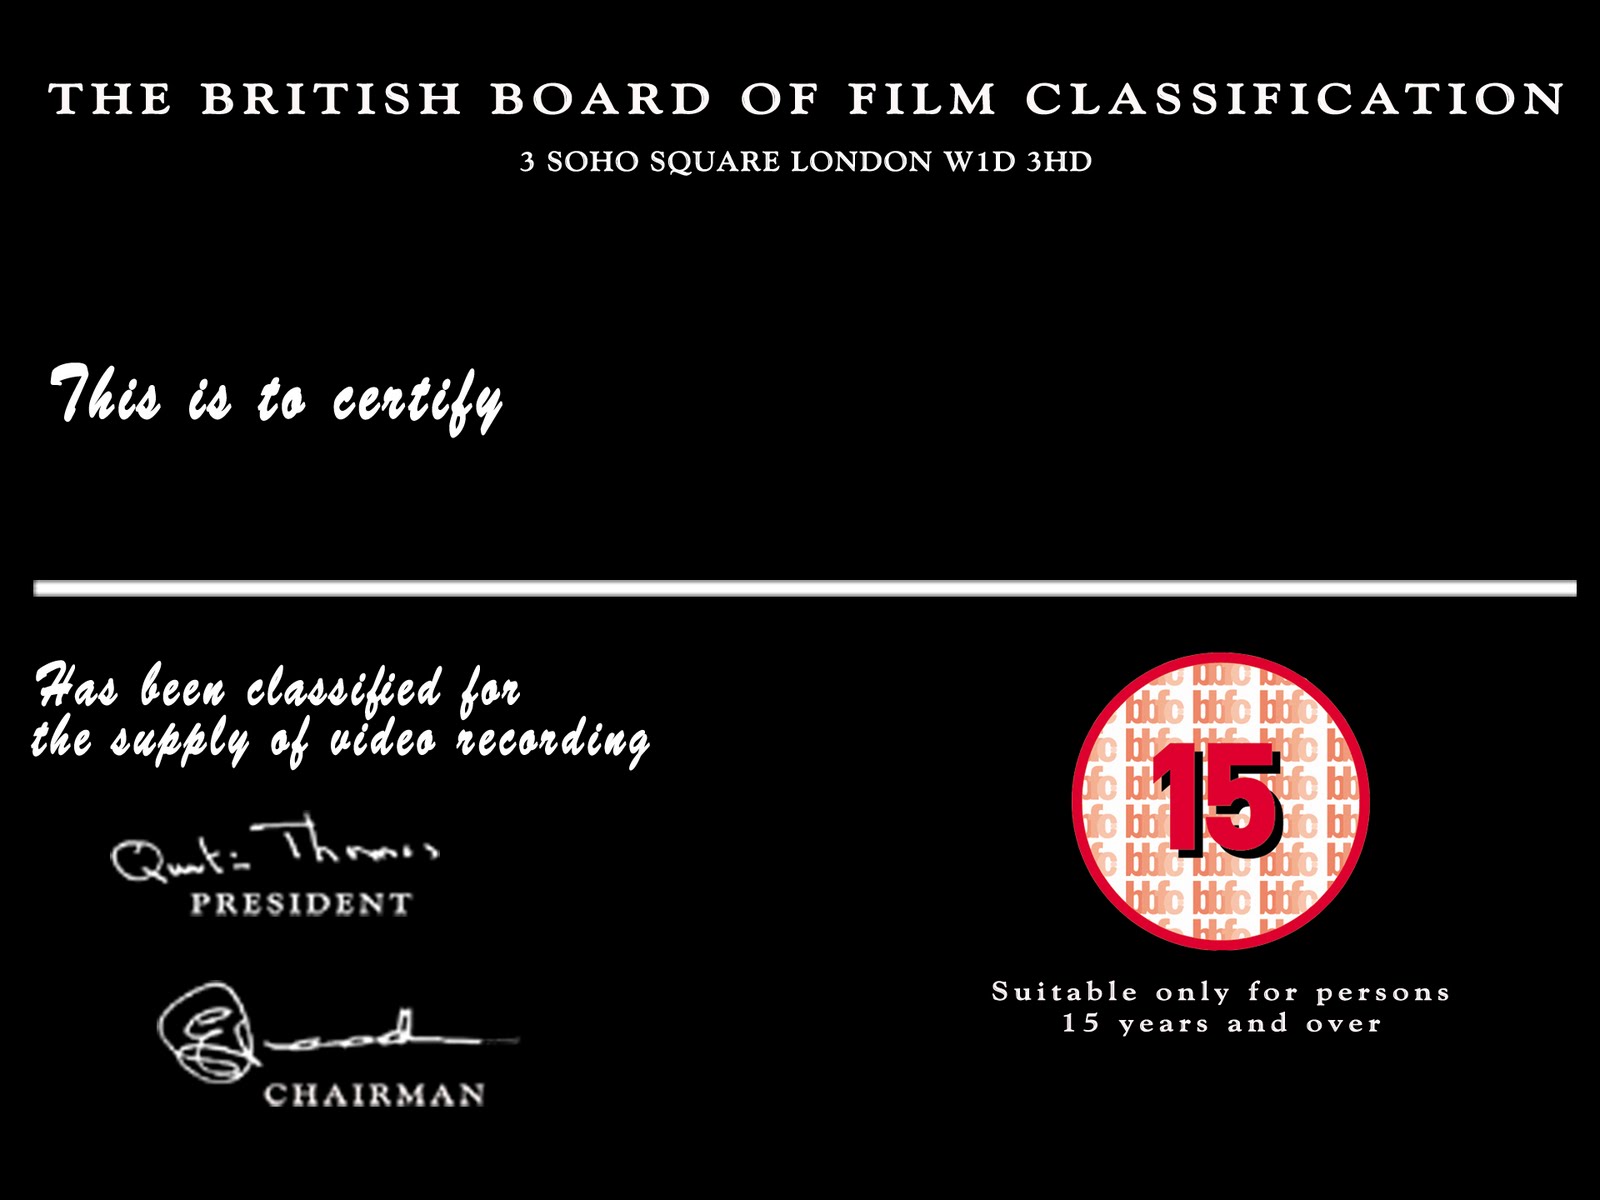 Film Rating Group 19